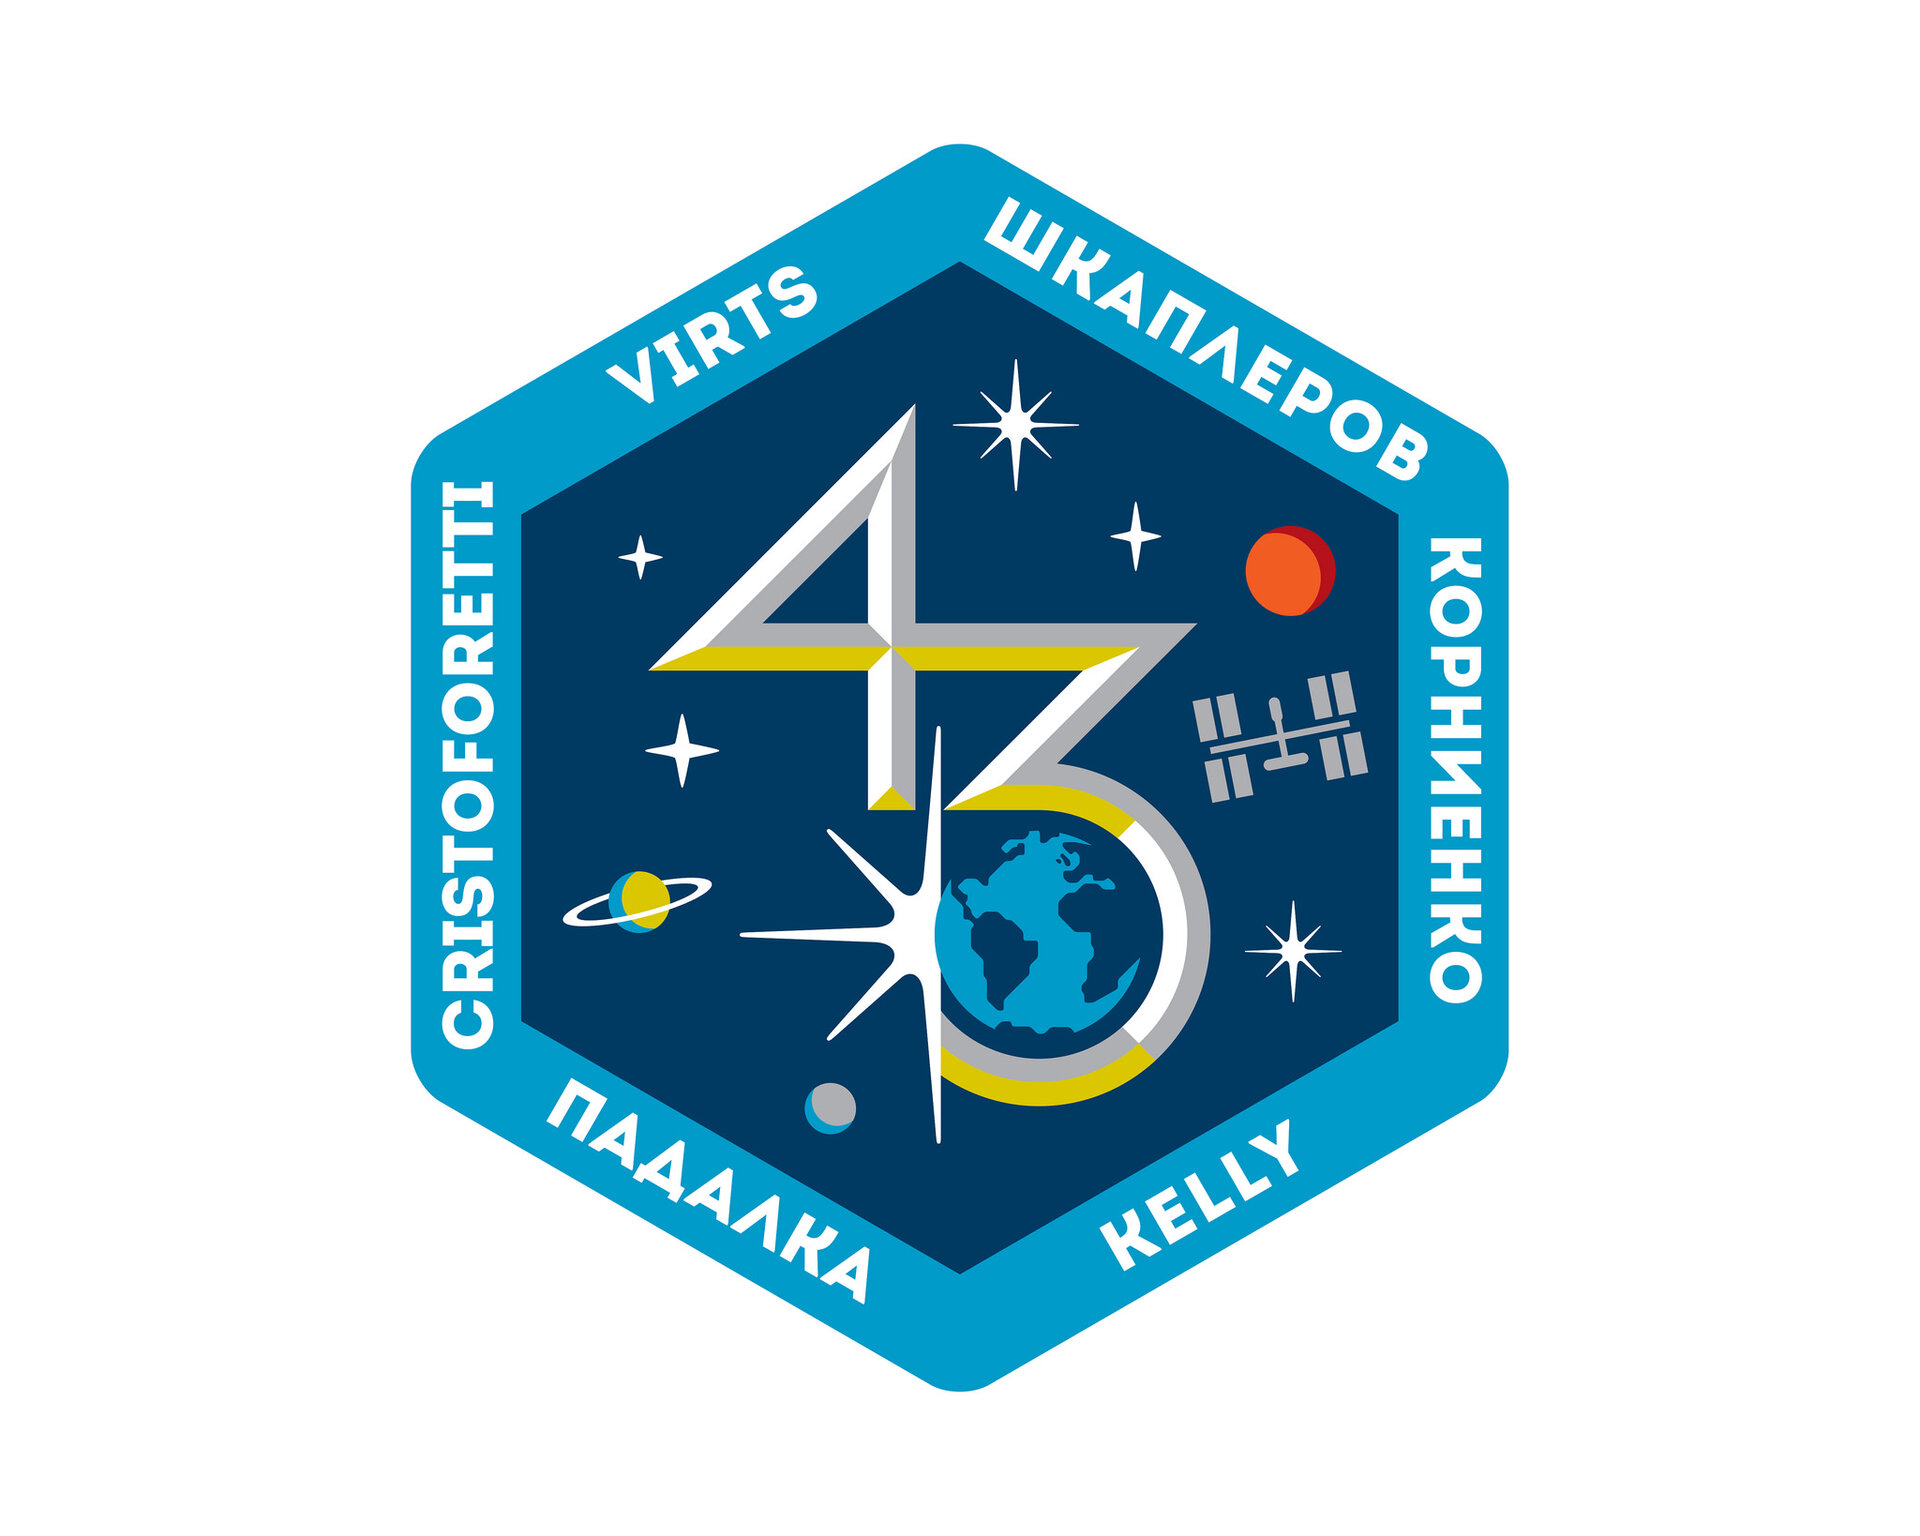 ISS Expedition 43 patch, 2015